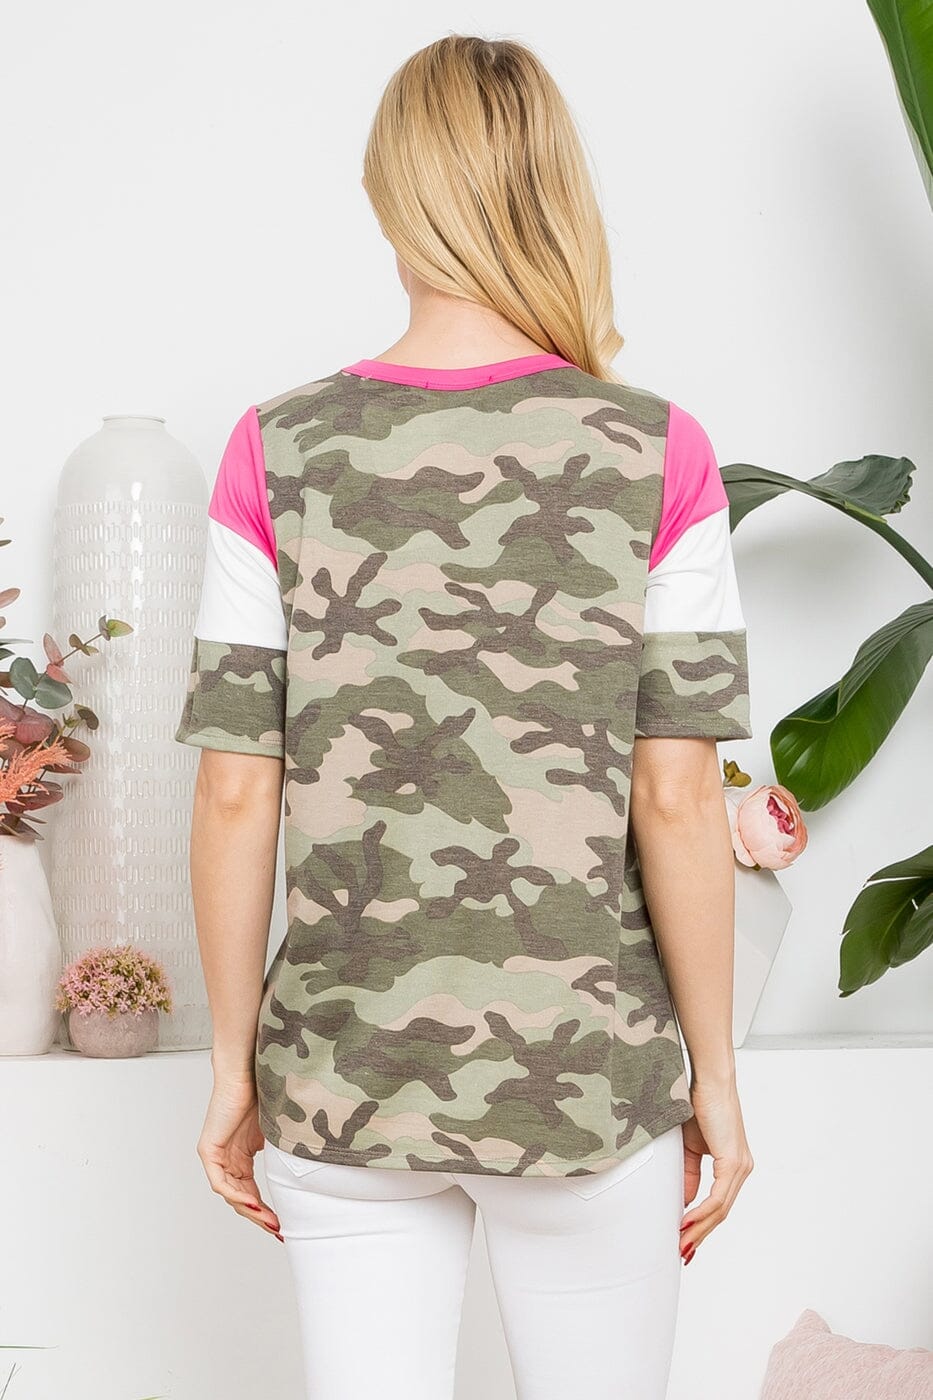 Womens Color Block Top, Green Camo Pink White Striped Shirt Tops MomMe and More 